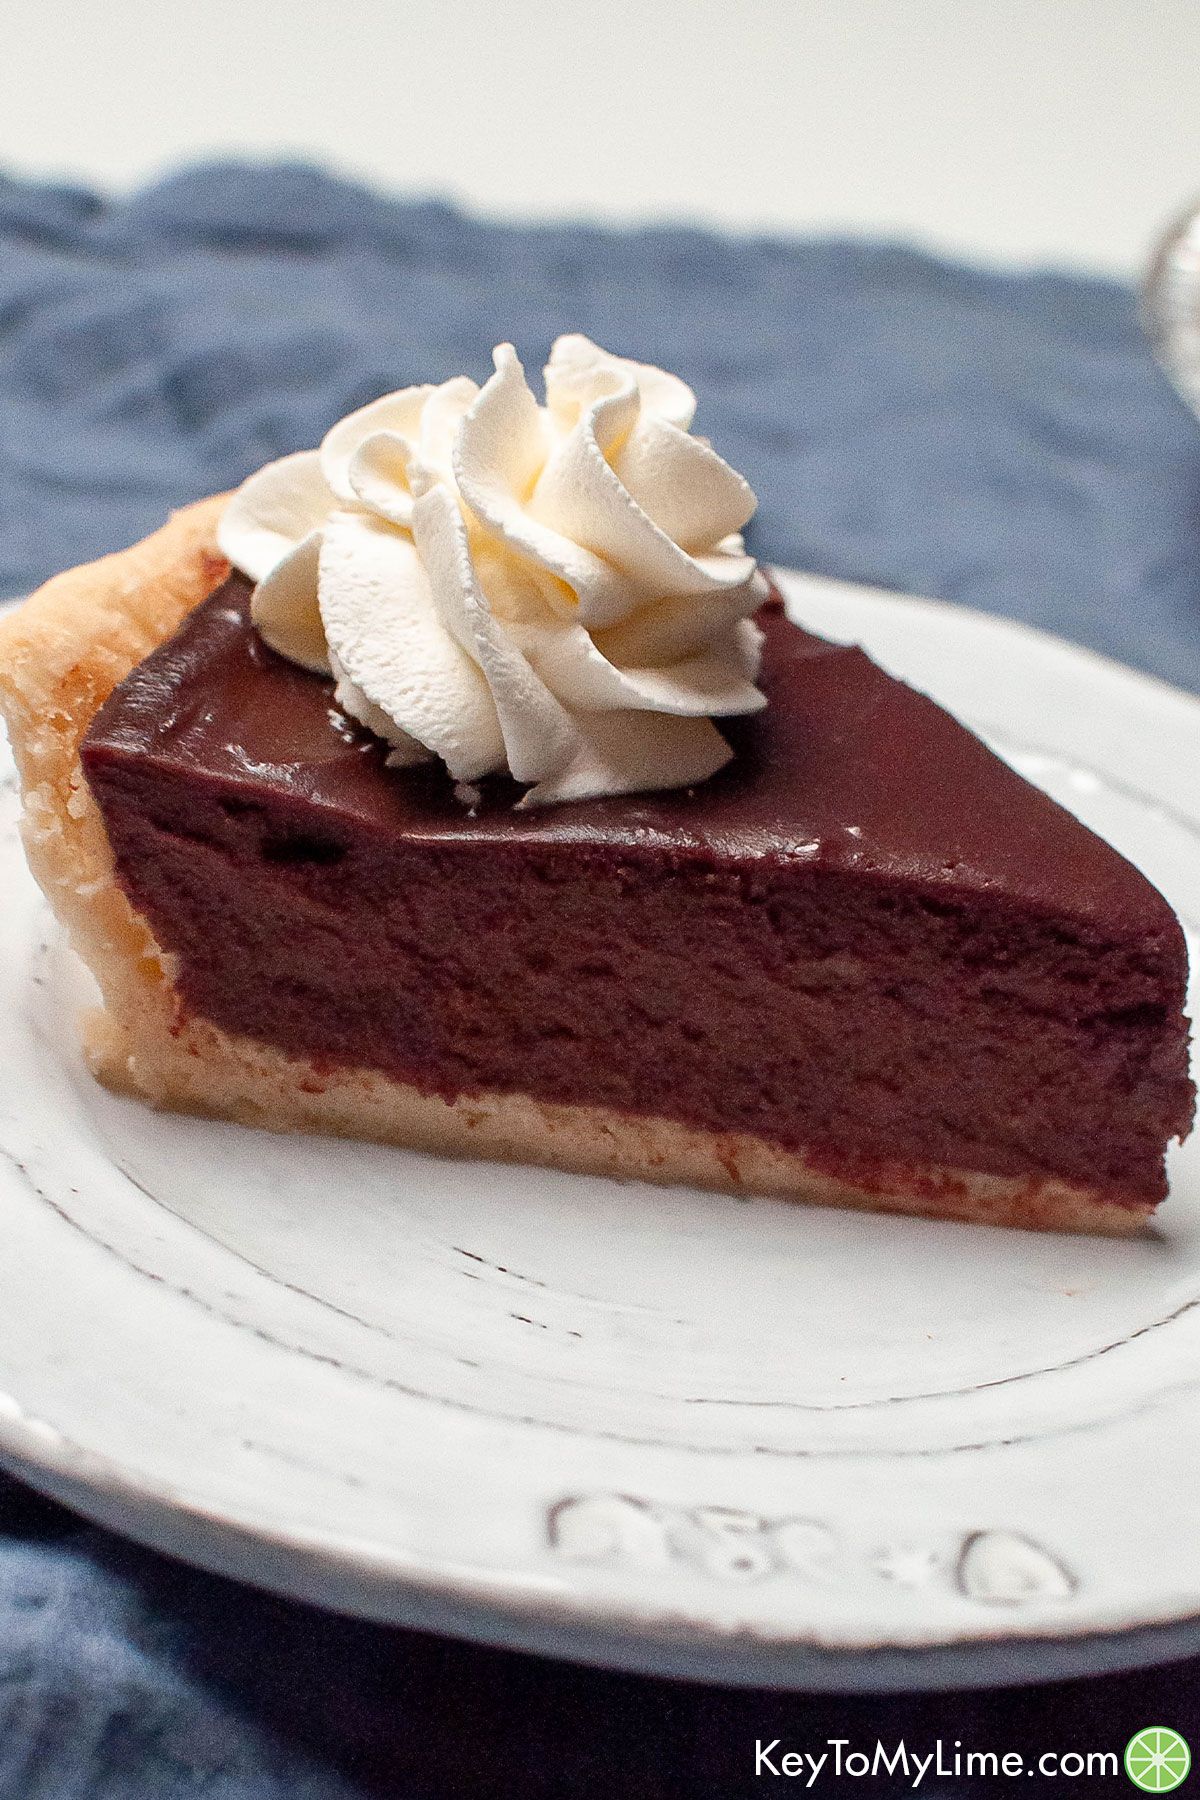 A side image of a slice of chocolate pie with whipped cream on top.